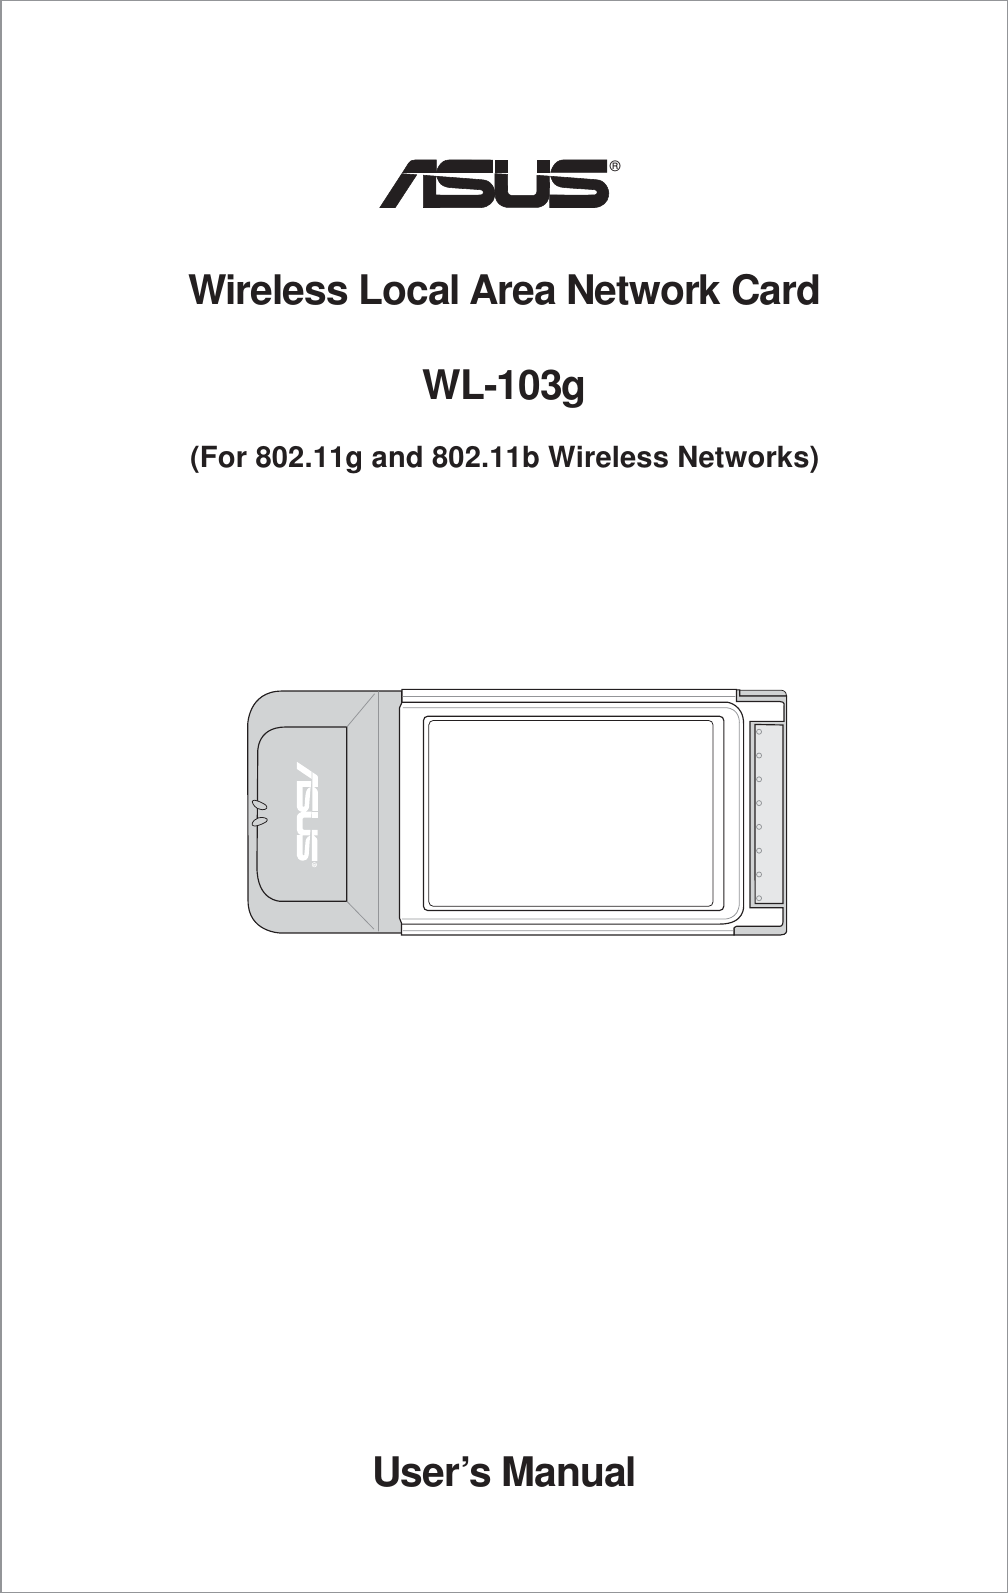 Wireless Local Area Network CardWL-103g(For 802.11g and 802.11b Wireless Networks)®User’s Manual